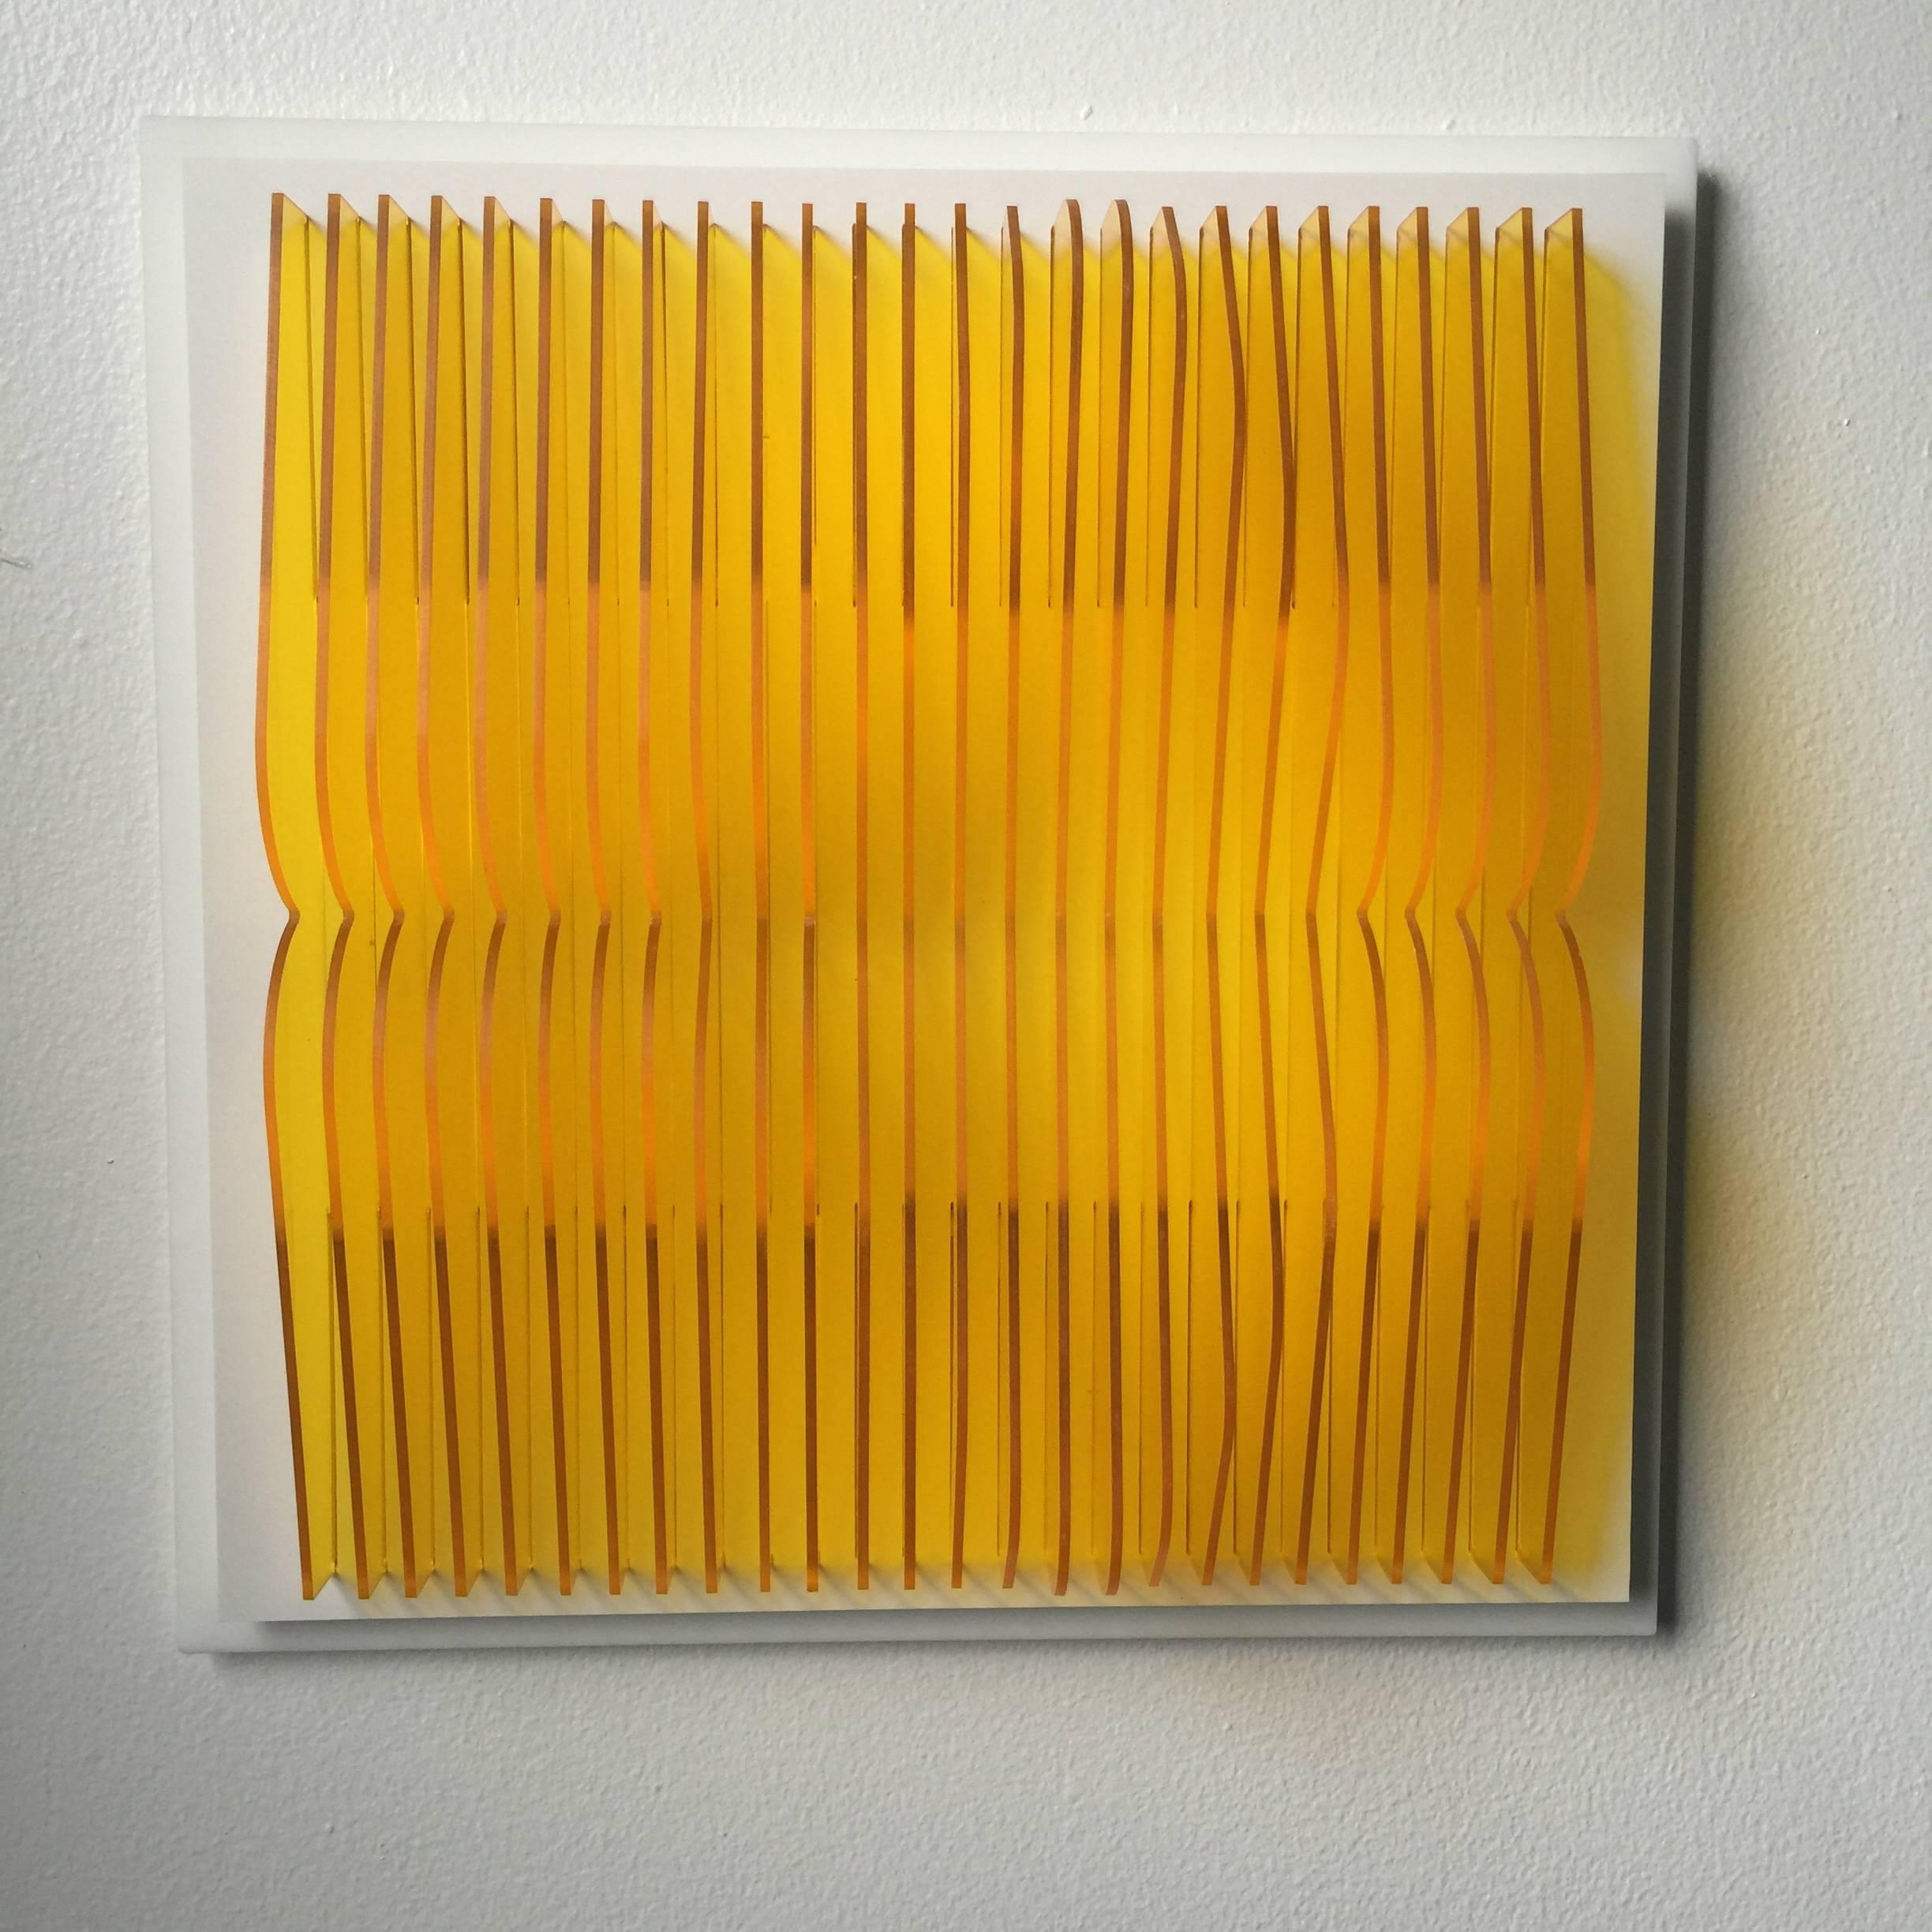 Trans Yellow Pond - kinetic wall sculpture by J. Margulis - Sculpture by Jose Margulis